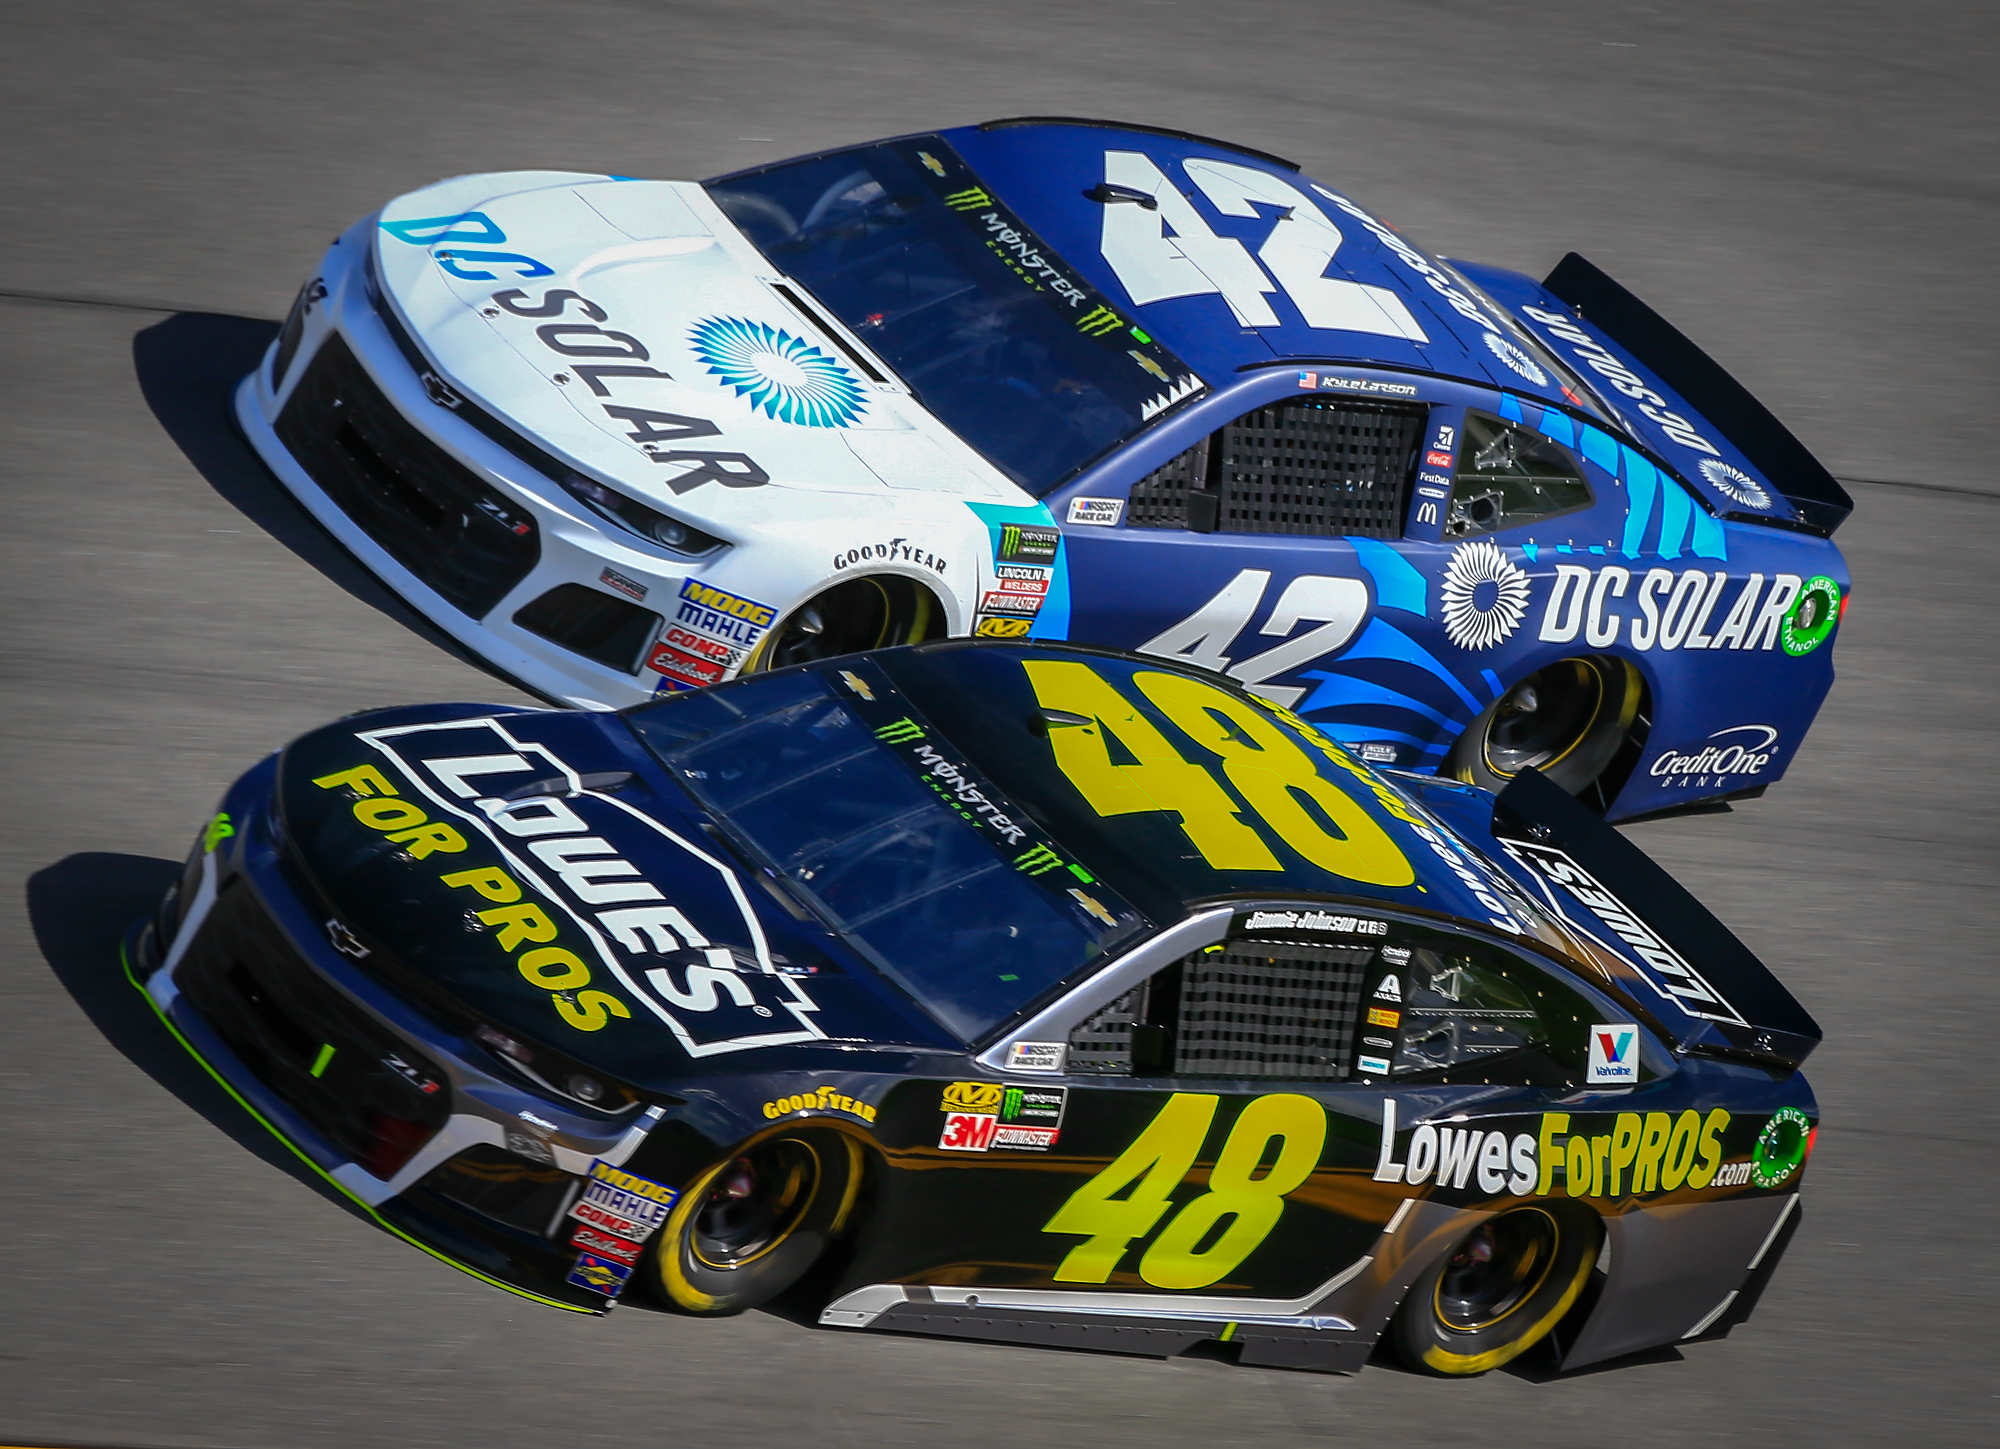 #48 Lowes Chevy of Jimmie Johnson